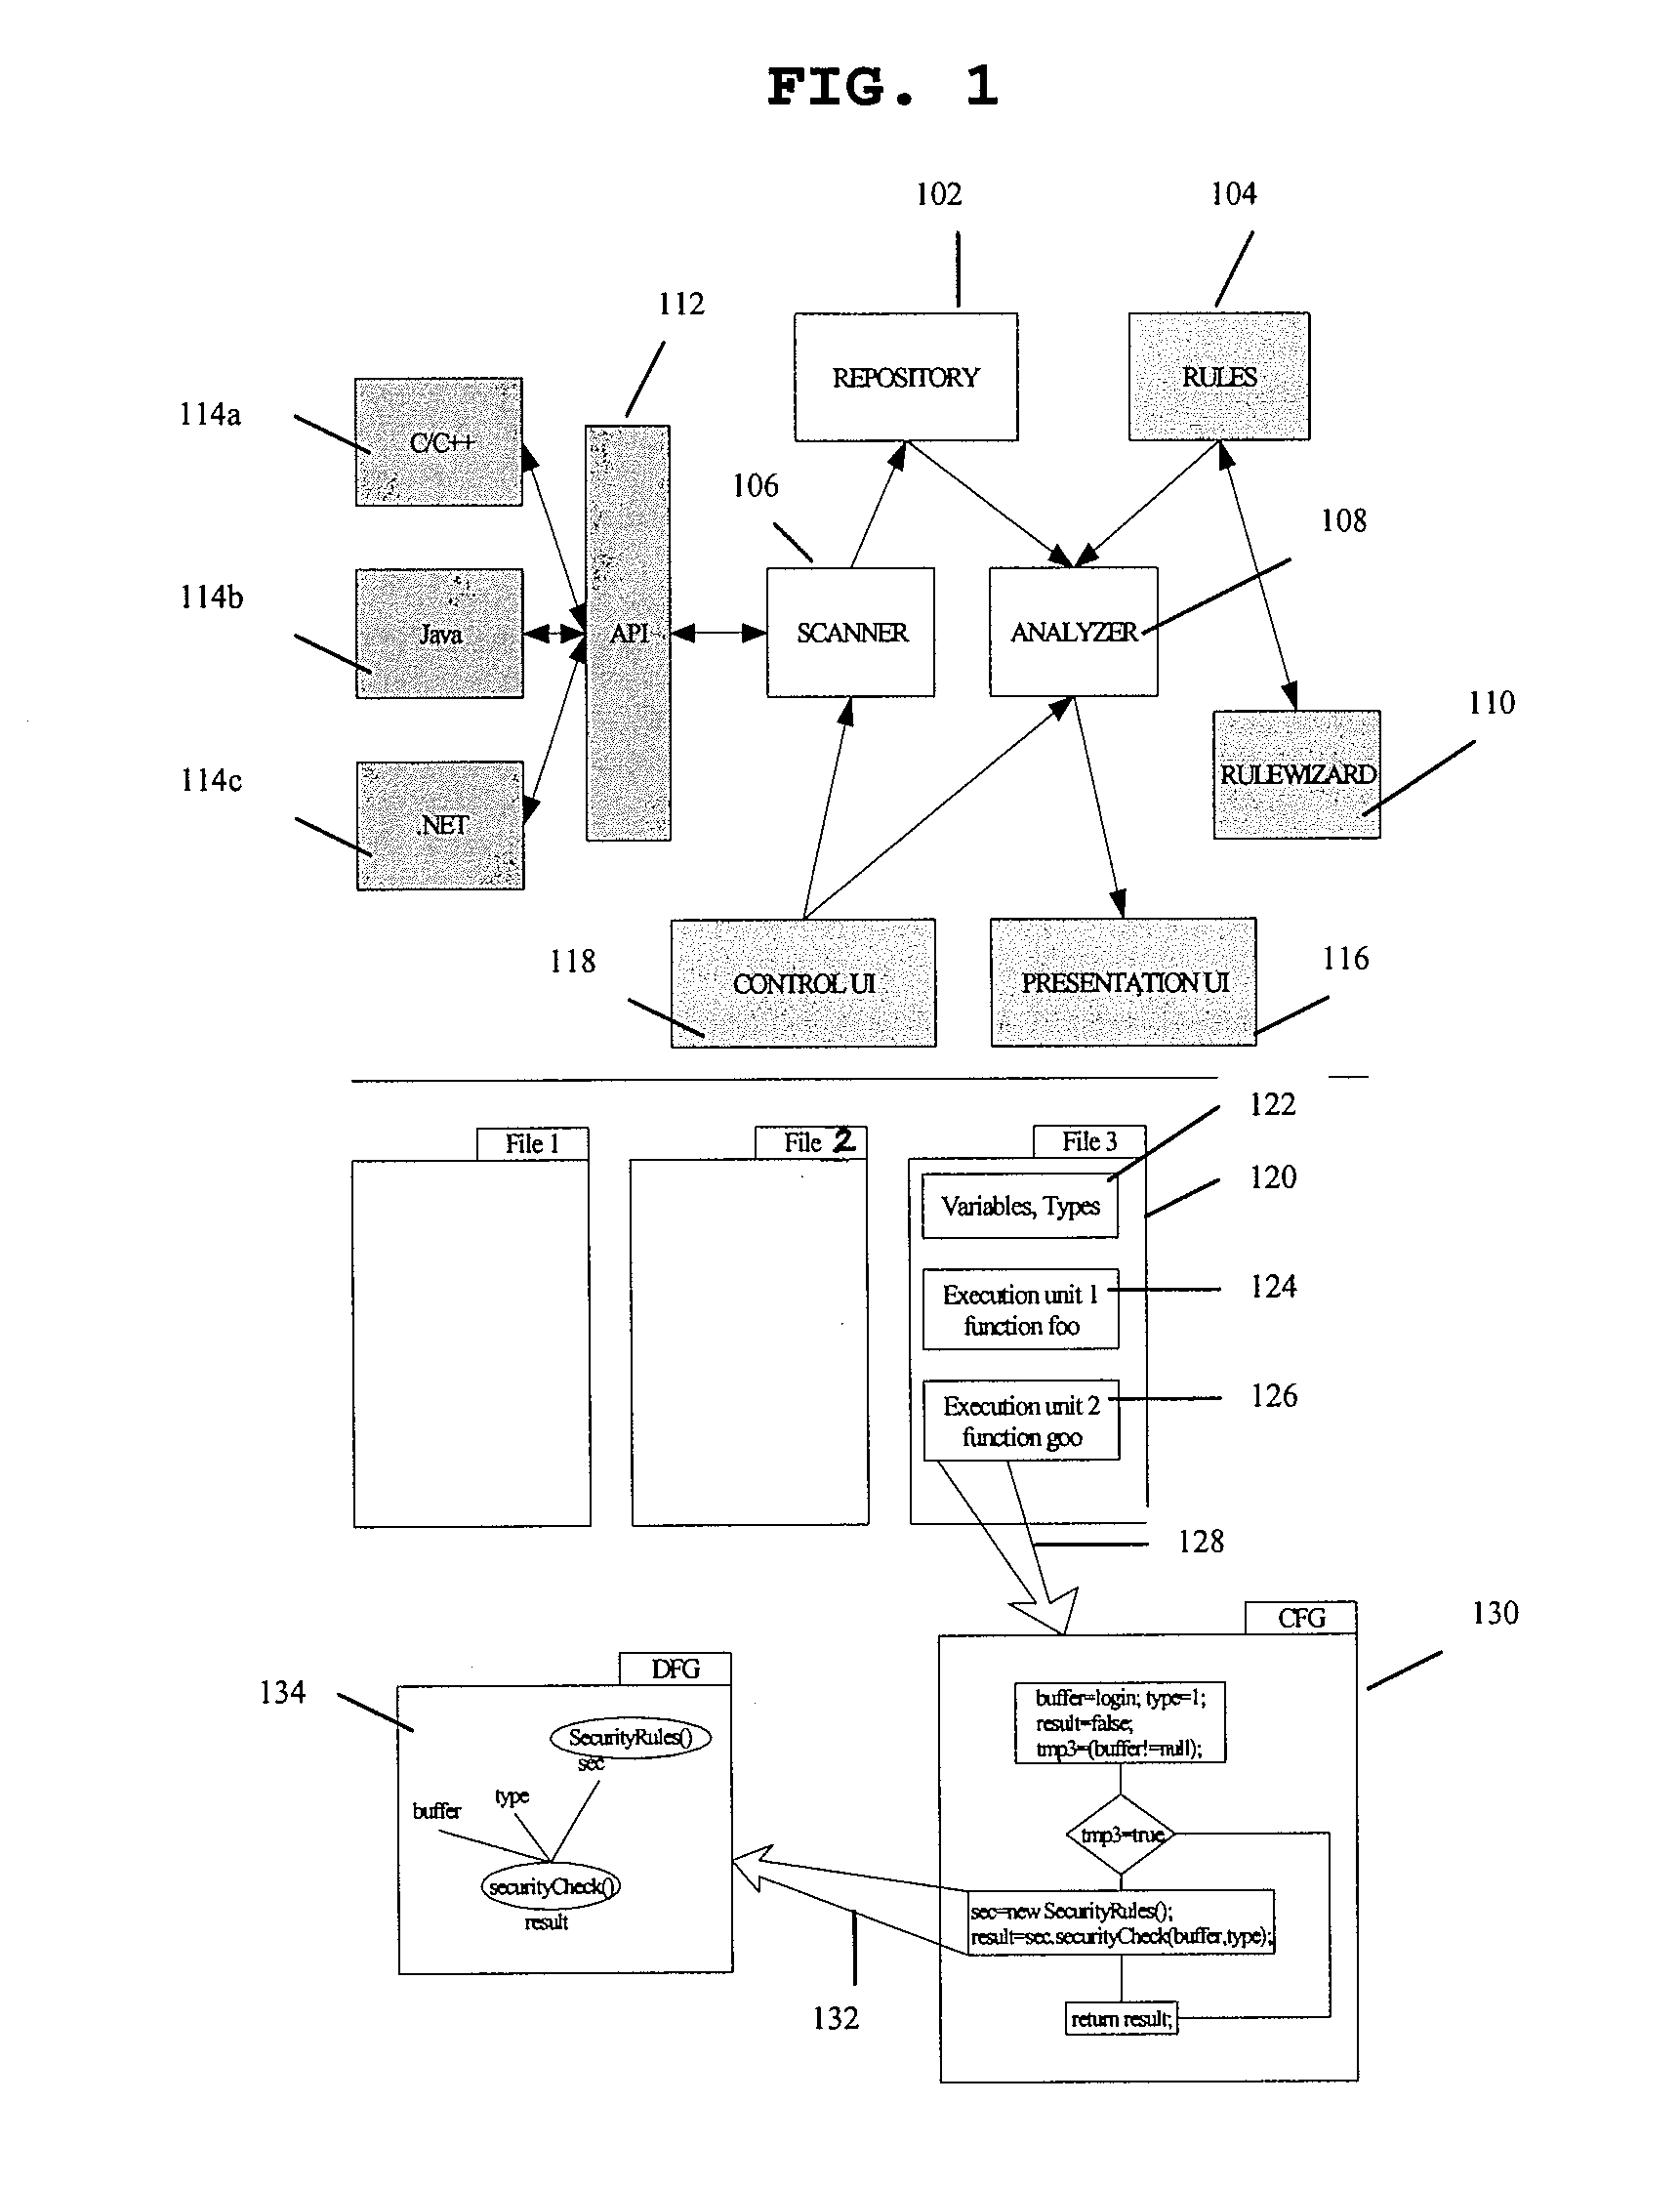 System and method for detecting defects in a computer program using data and control flow analysis